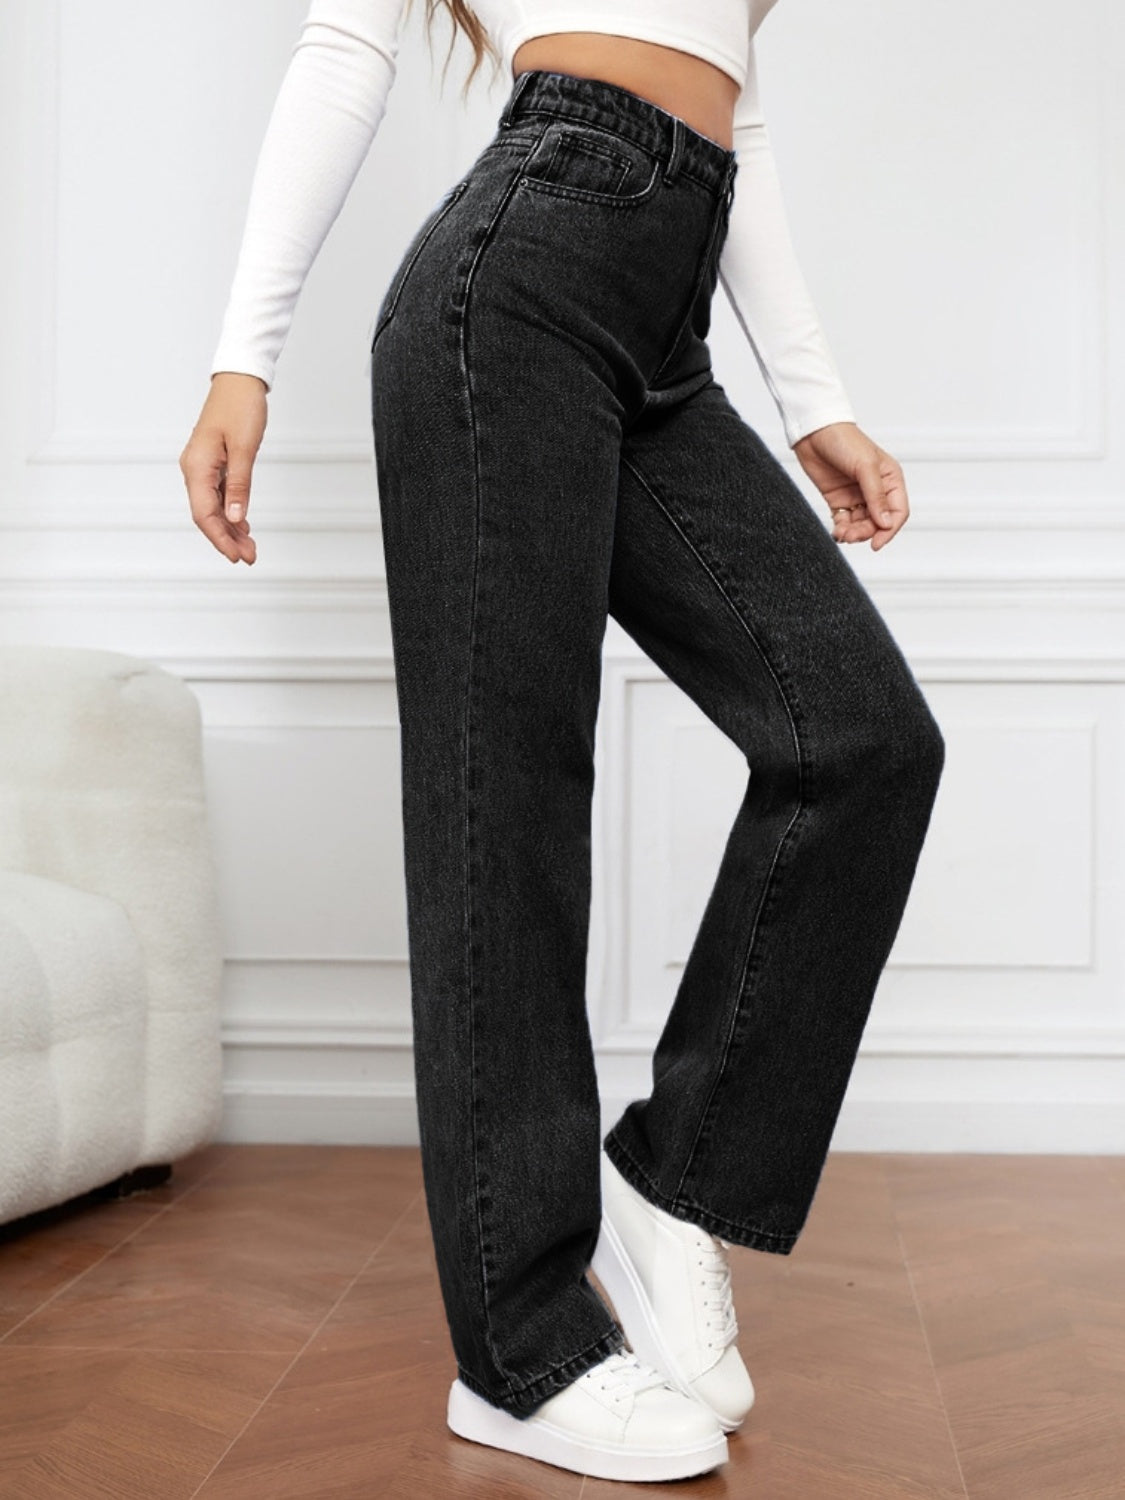 Shop the latest High Waist Straight Jeans for a chic, versatile look. Perfect fit, all-day comfort, and timeless style. Order yours now!